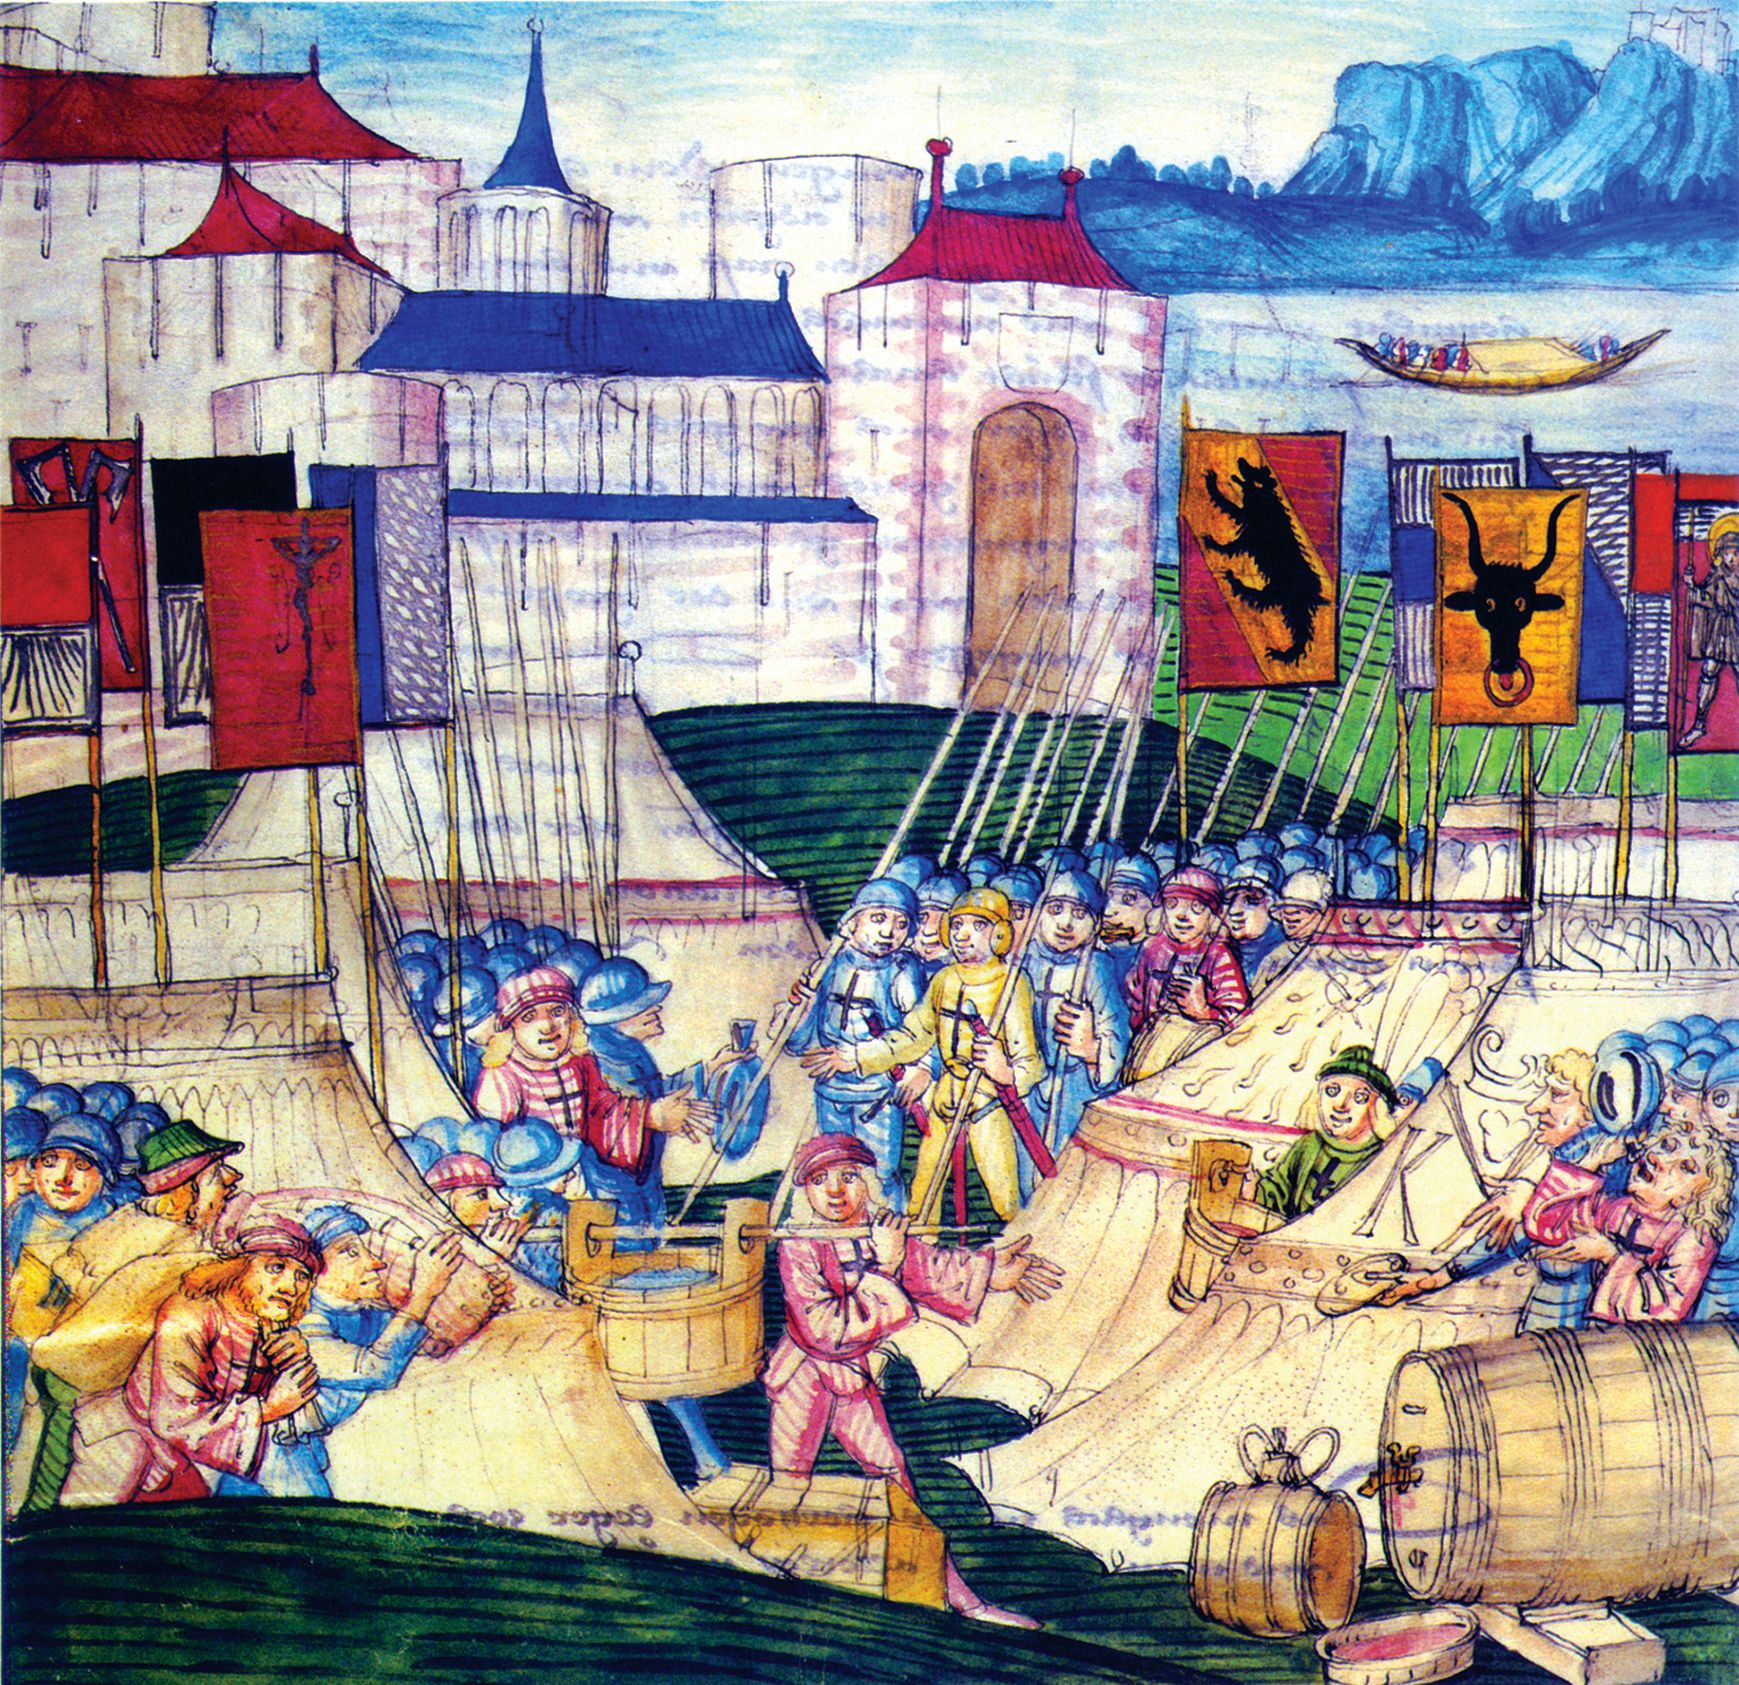 Swiss troops plunder the camp of Charles the Bold, Duke of Burgundy after the battle of Grandson. Banners of the different Swiss regions are visible in the background, as well as Lake Neuchâtel beyond. 